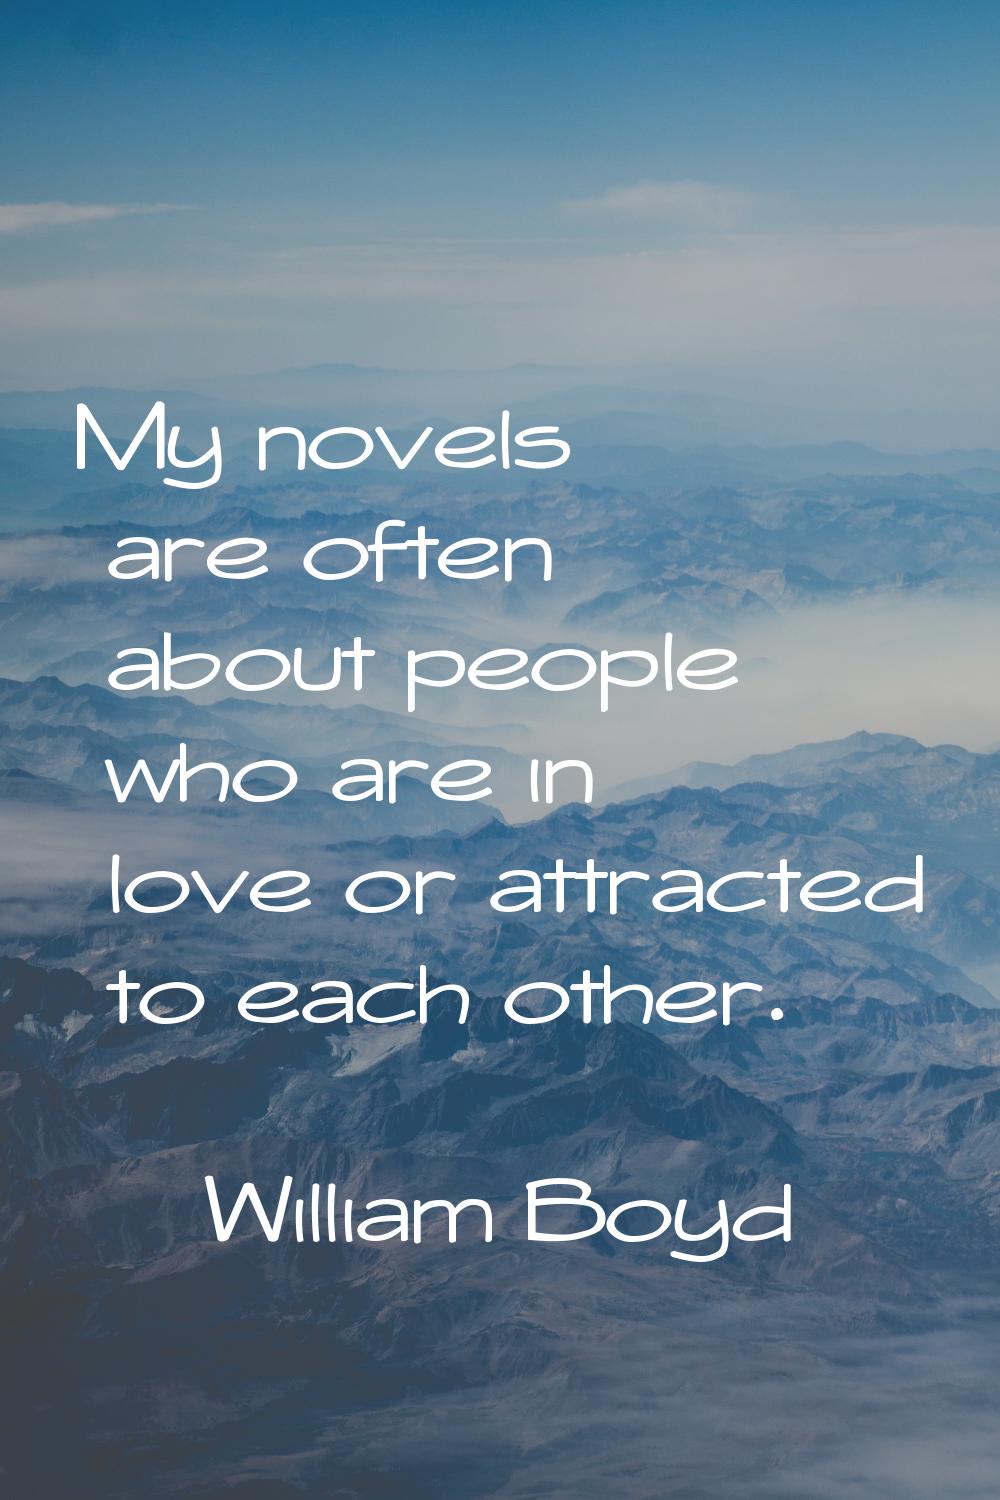 My novels are often about people who are in love or attracted to each other.